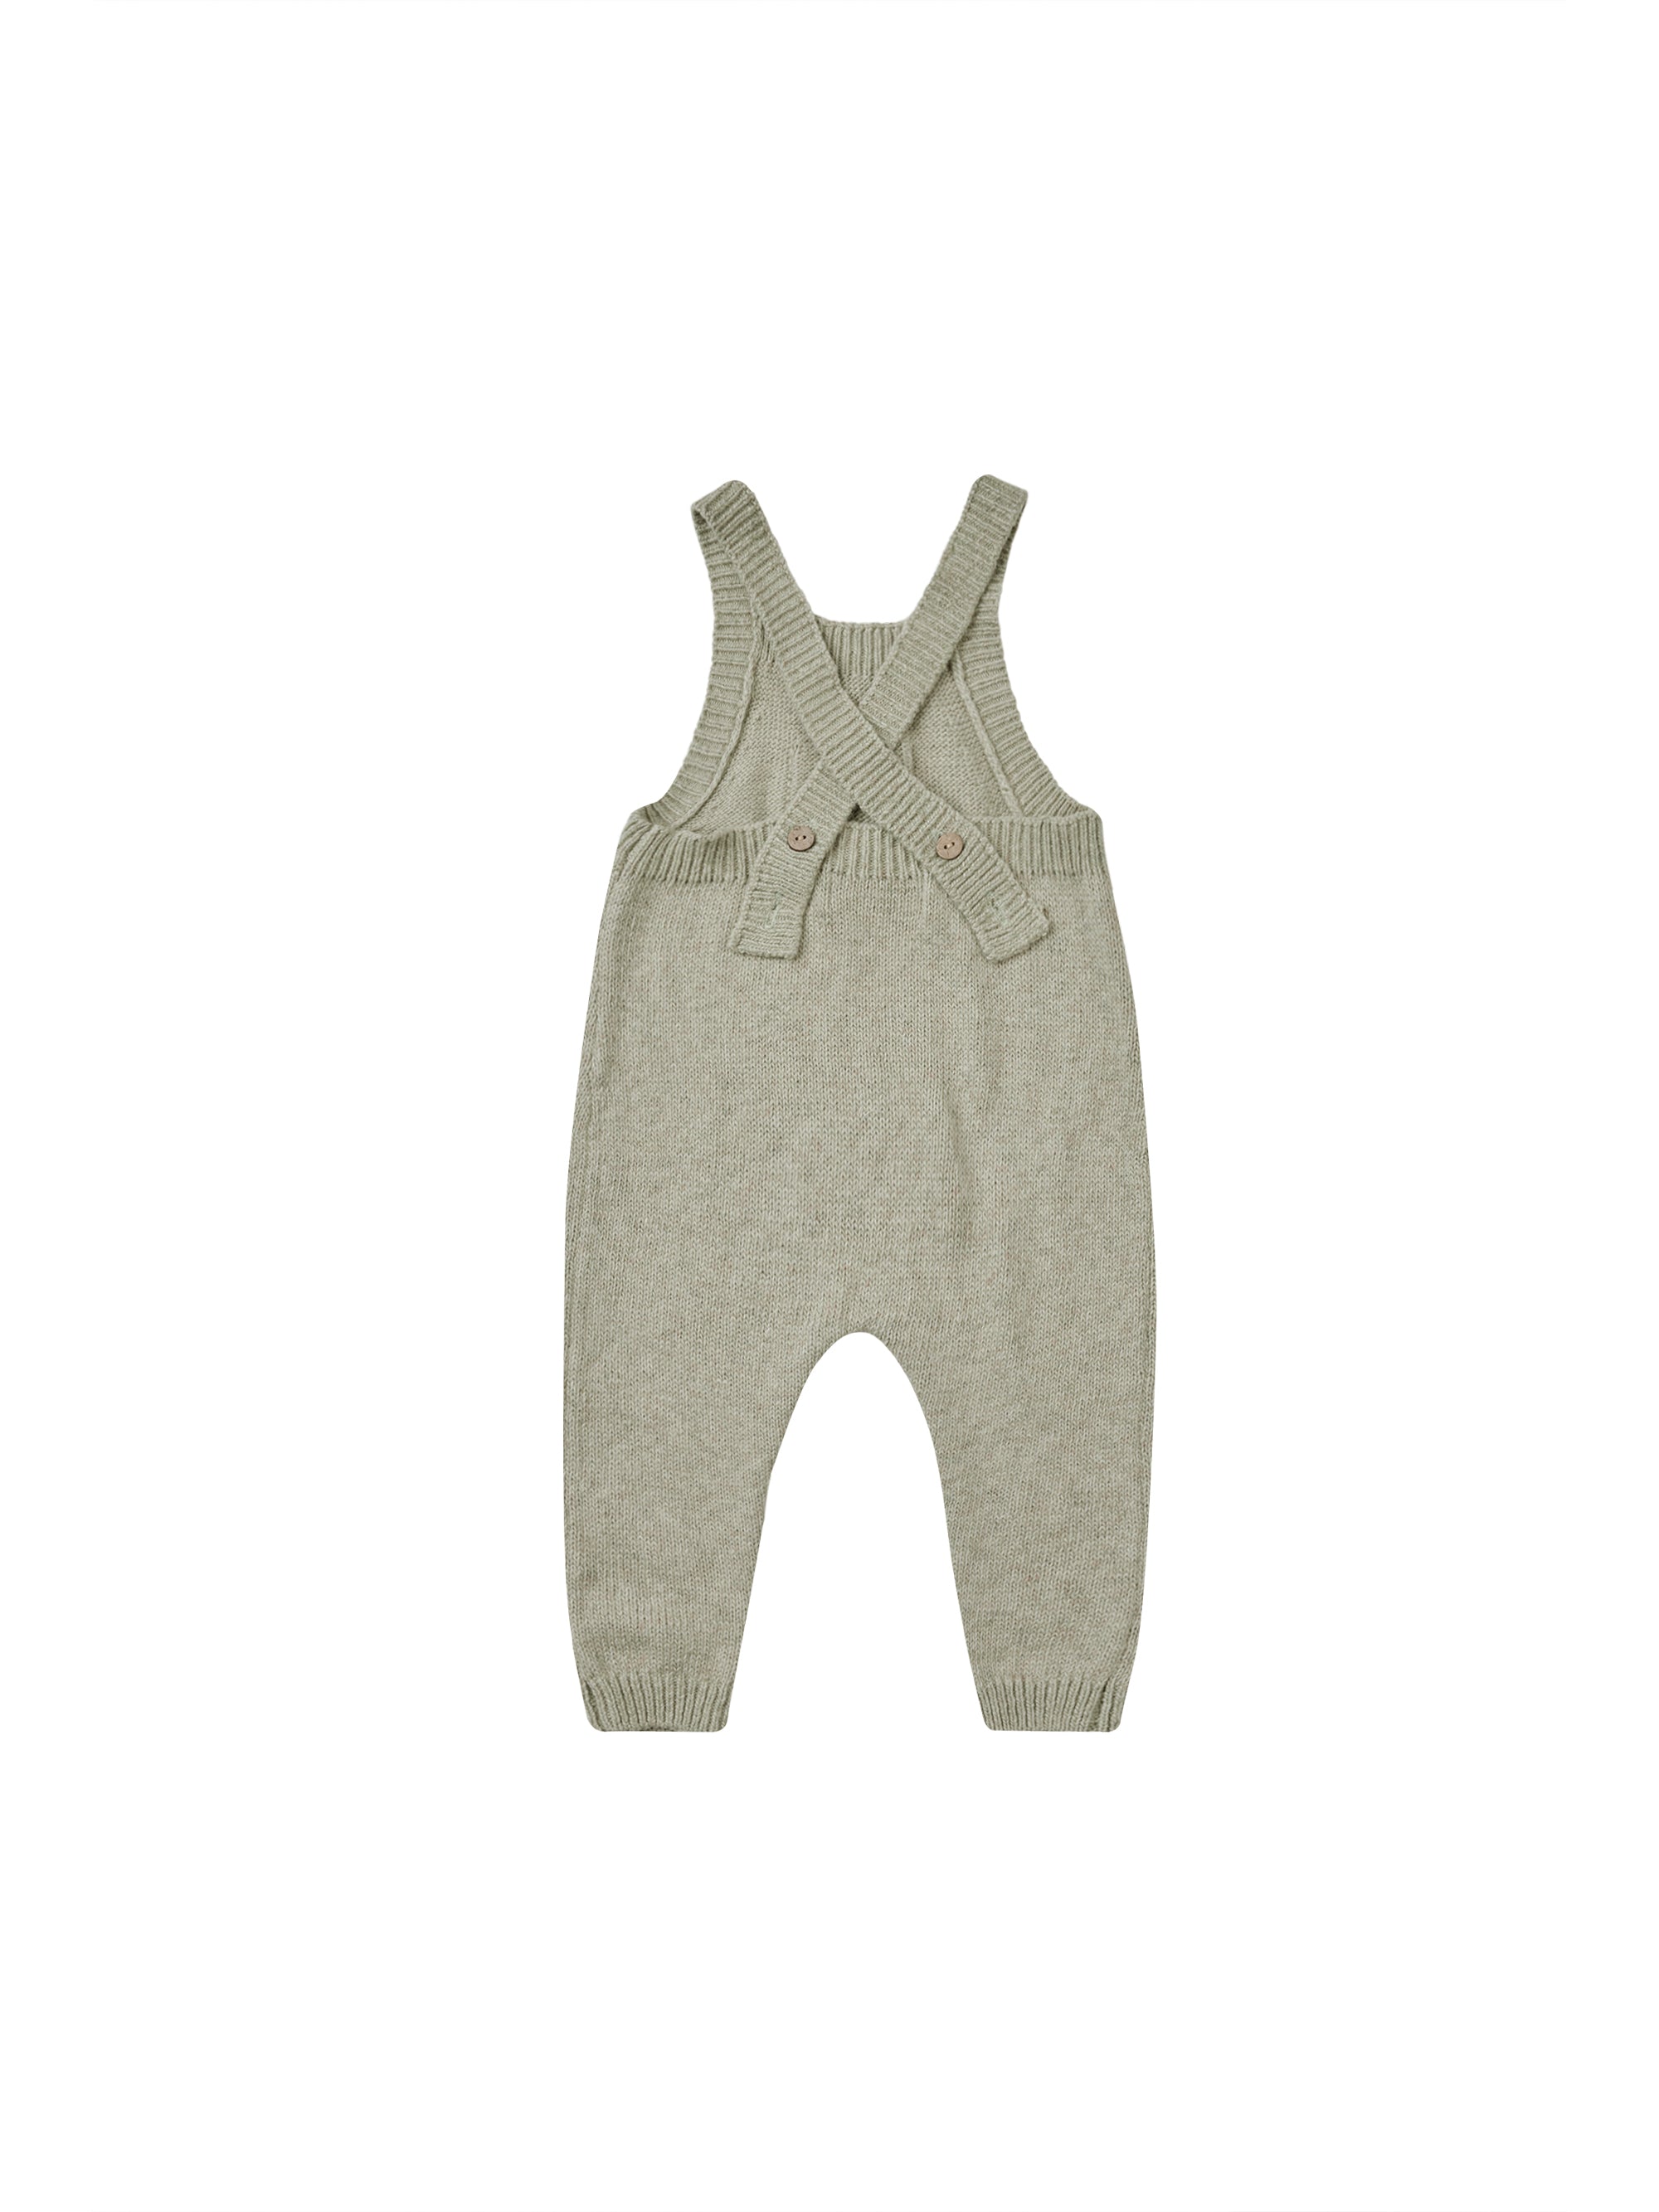 Quincy Mae knit overalls || sage